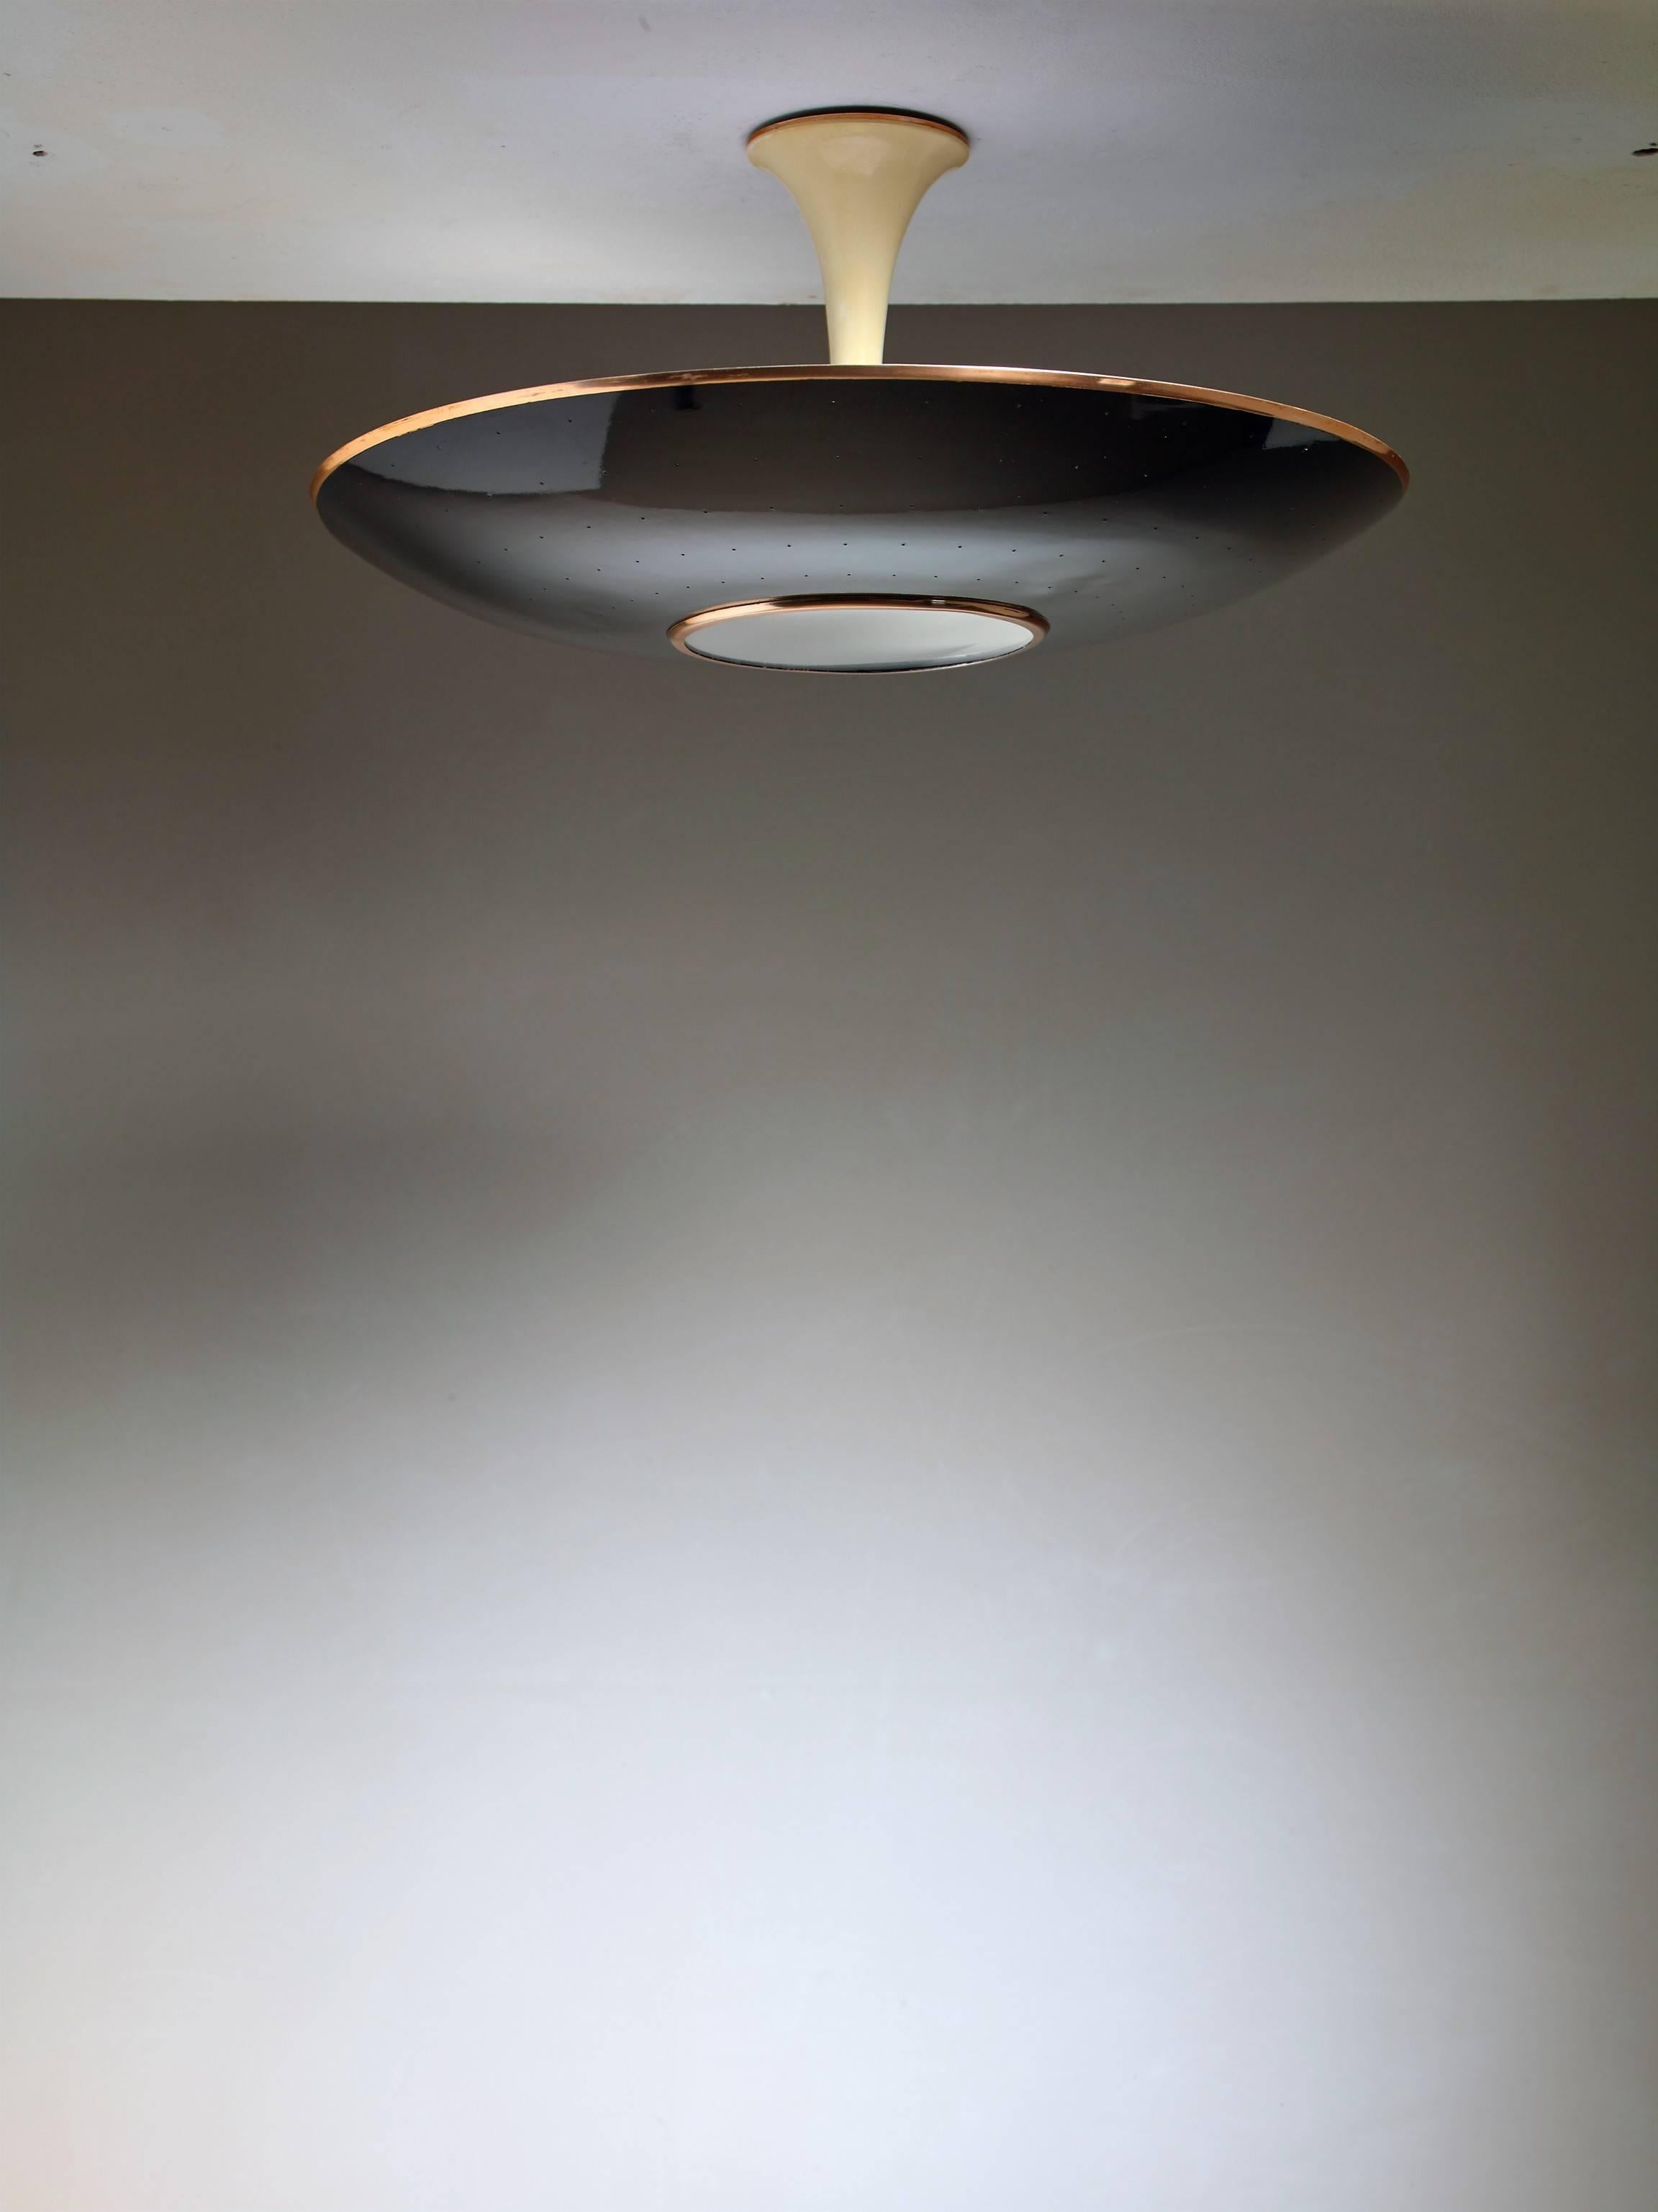 A Mid-Century ceiling lamp with a curved black lacquered metal shade with a frosted glass diffuser in the centre. The lamp has three E27 light bulbs and the shade has pin point perforations.